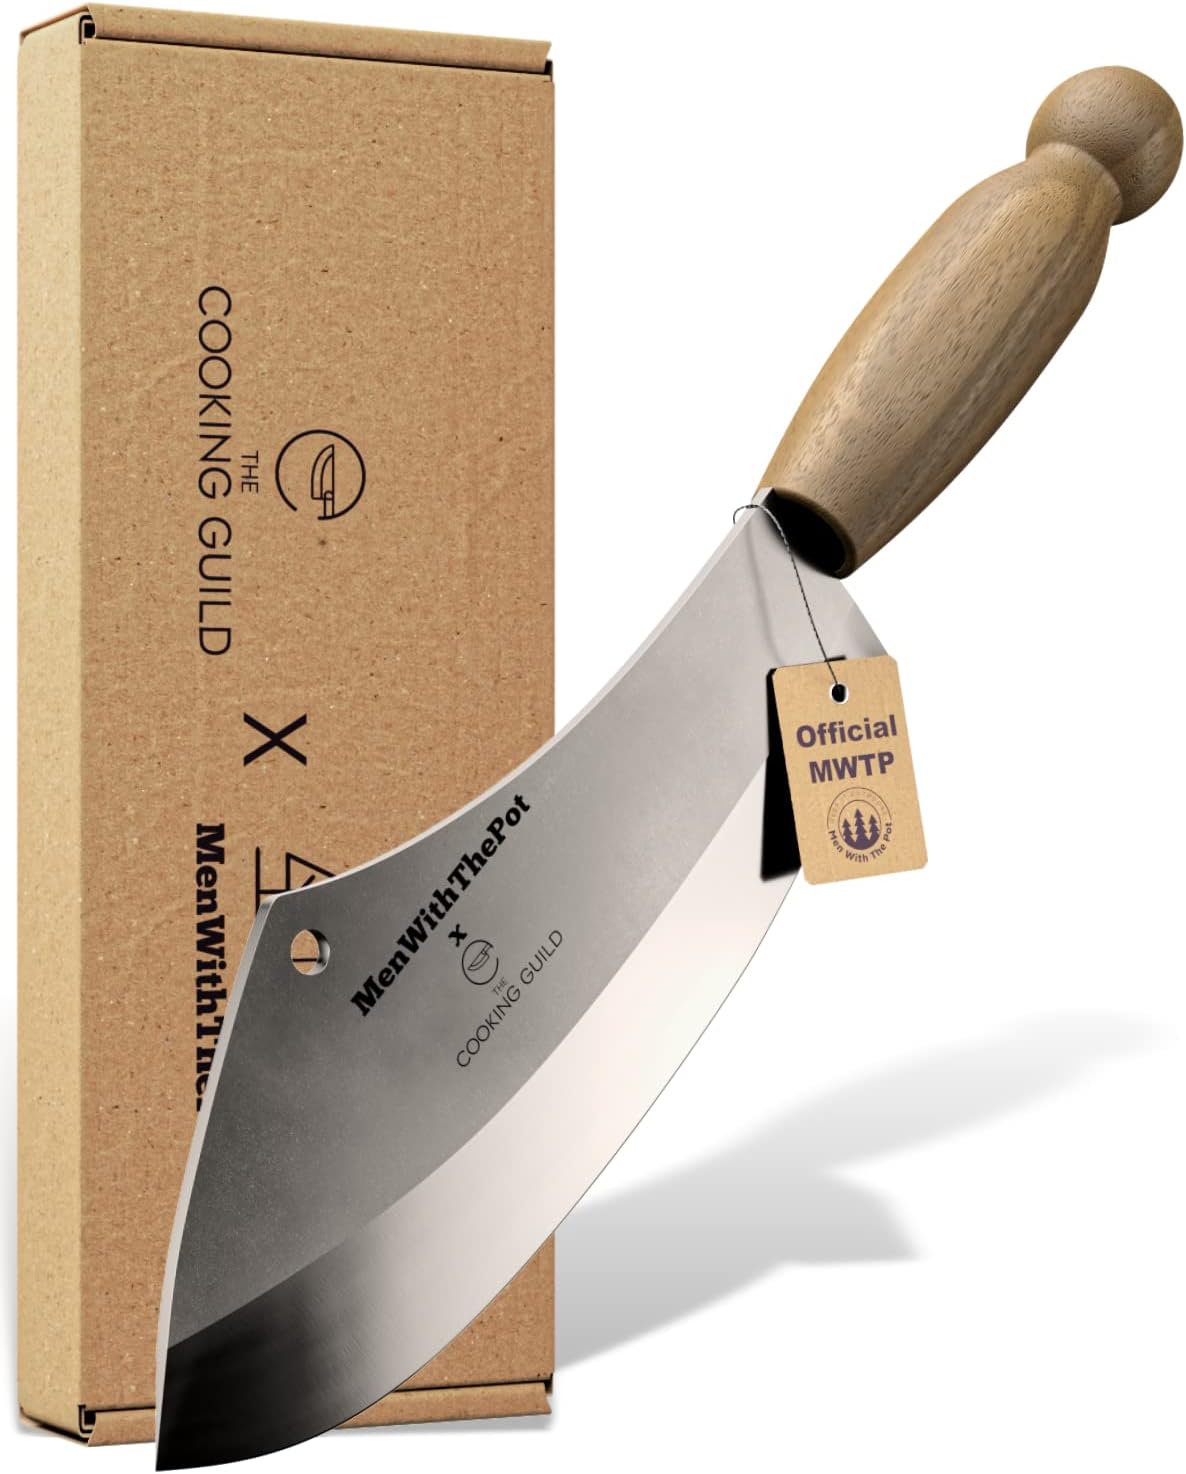 The Cooking Guild x MenWithThePot Professional Cleaver Knife - 7.4 Butcher Knife Made of German Stainless Steel - Rust-Resistant Chopping Knife Heavy Duty Meat Cleaver Designed to Last a Lifetime